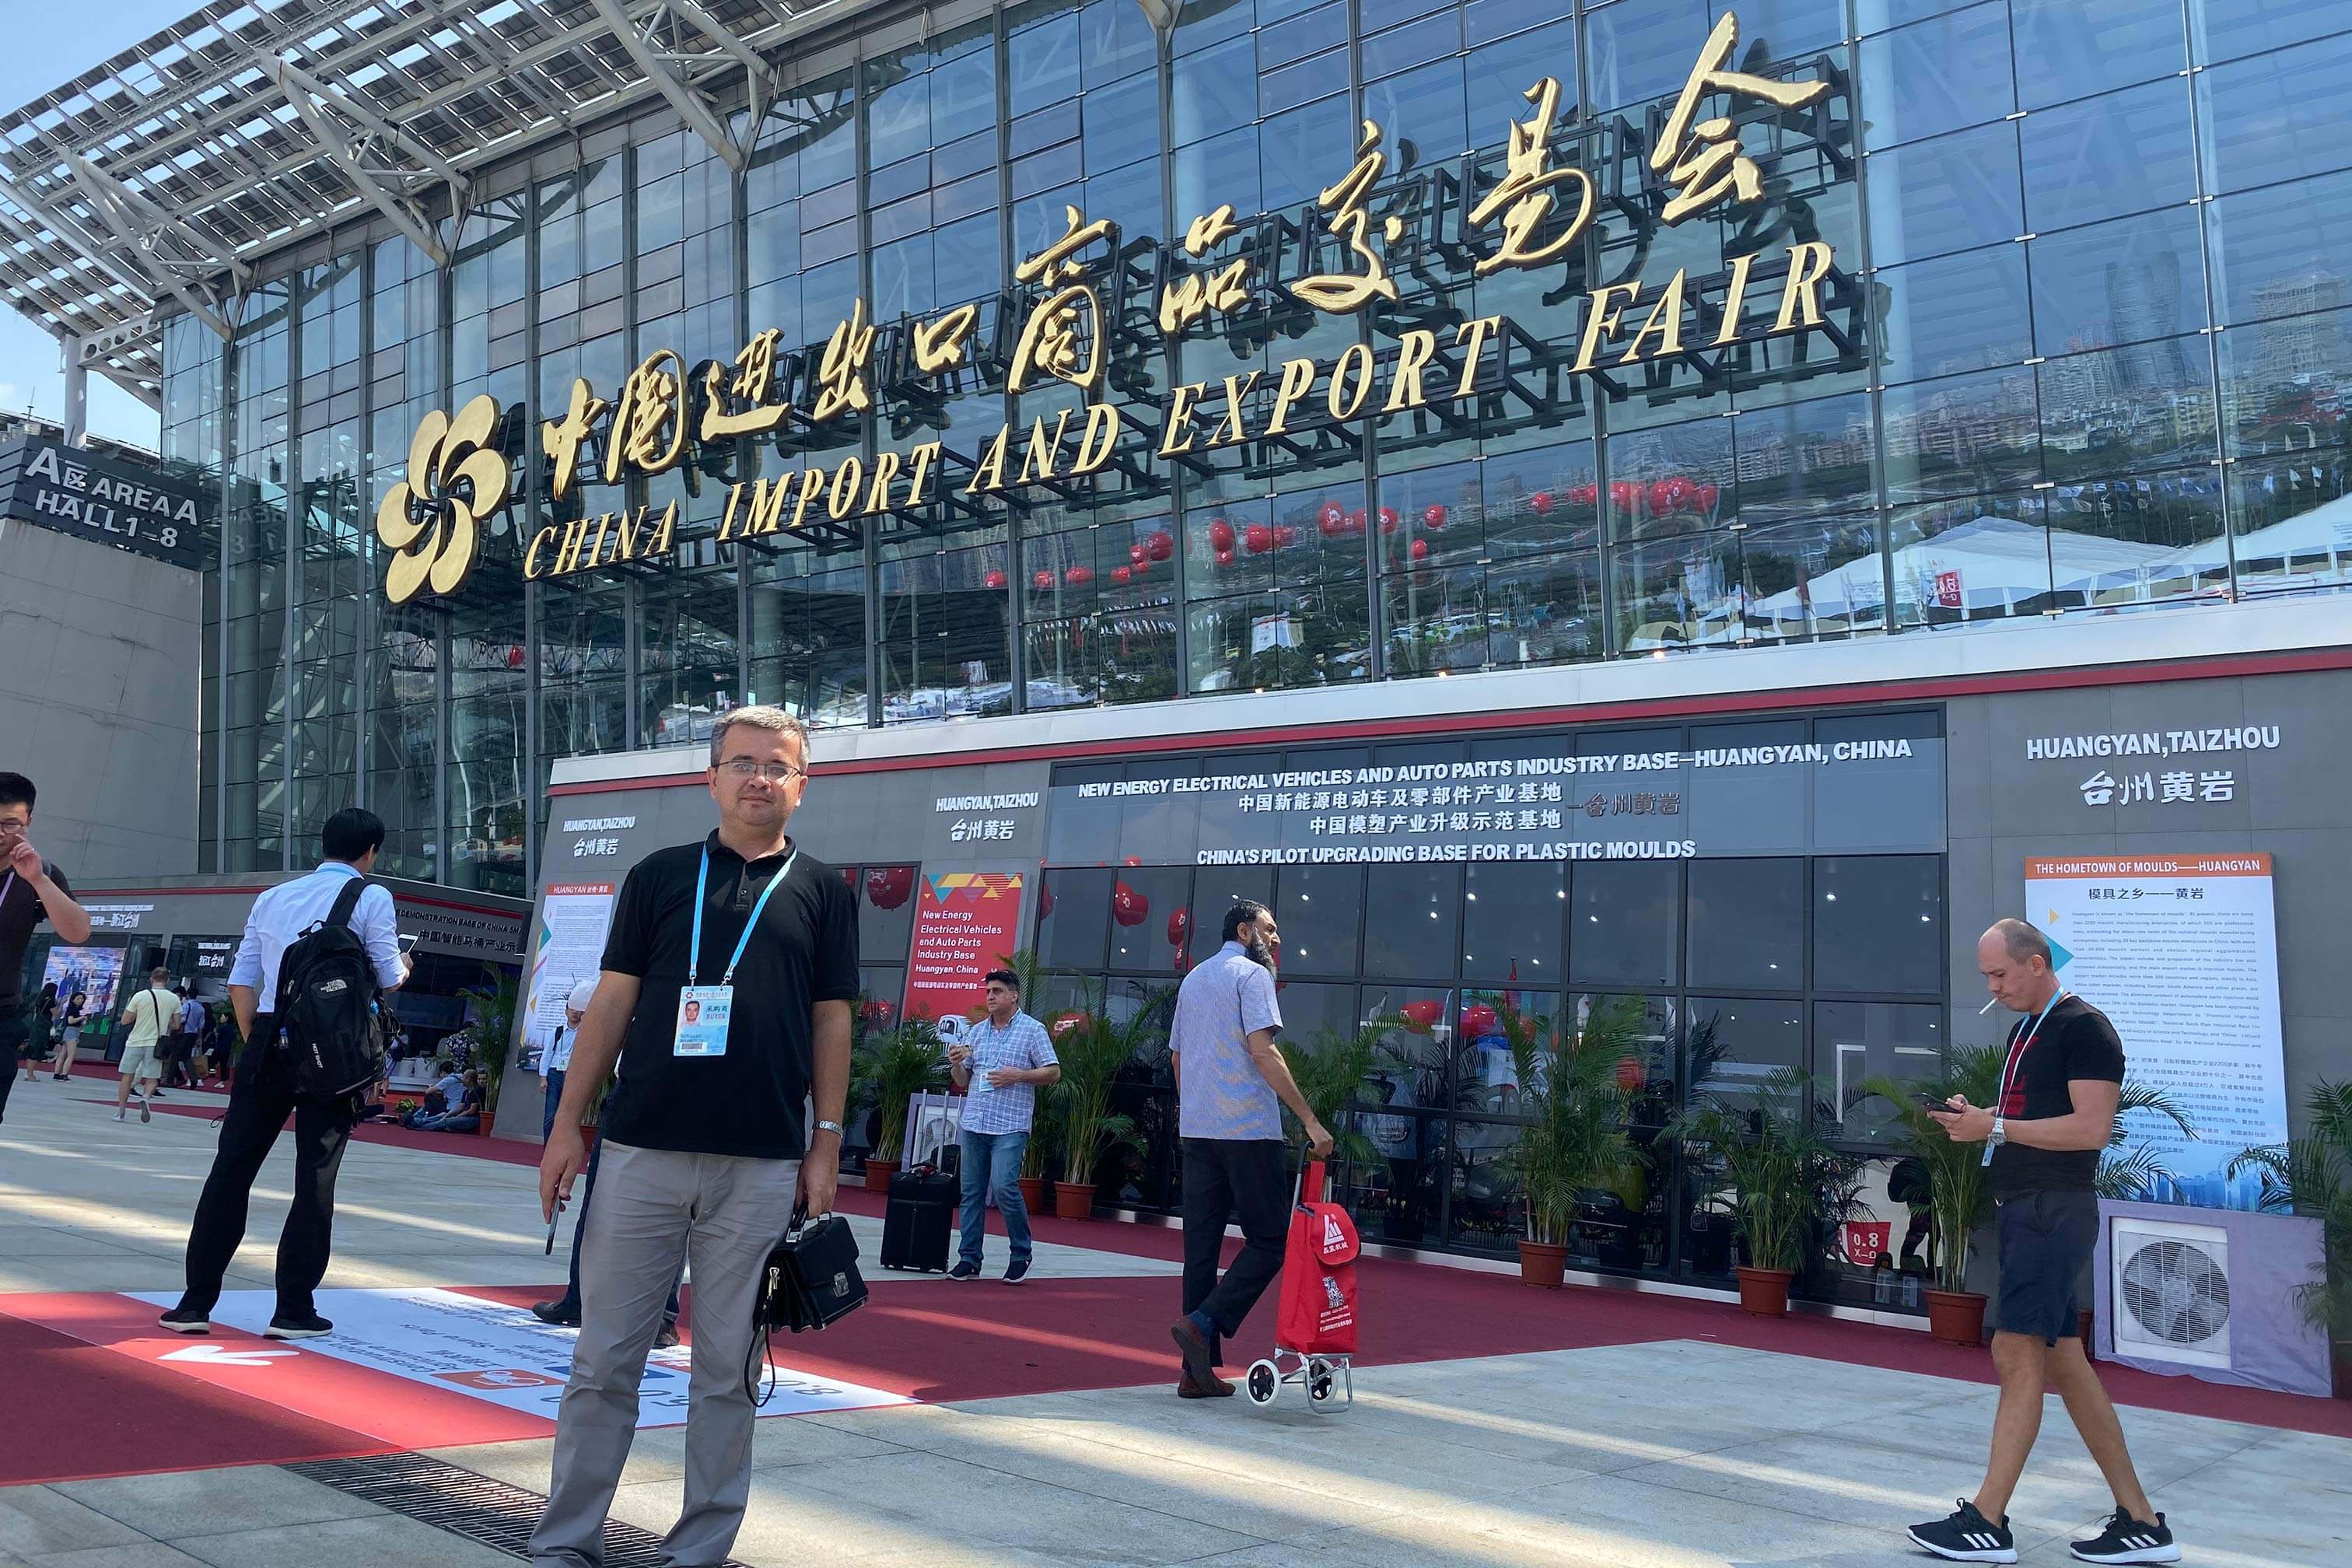 October 21st to 23rd, 2019, in the Canton Fair and hosted friends from all over the world.